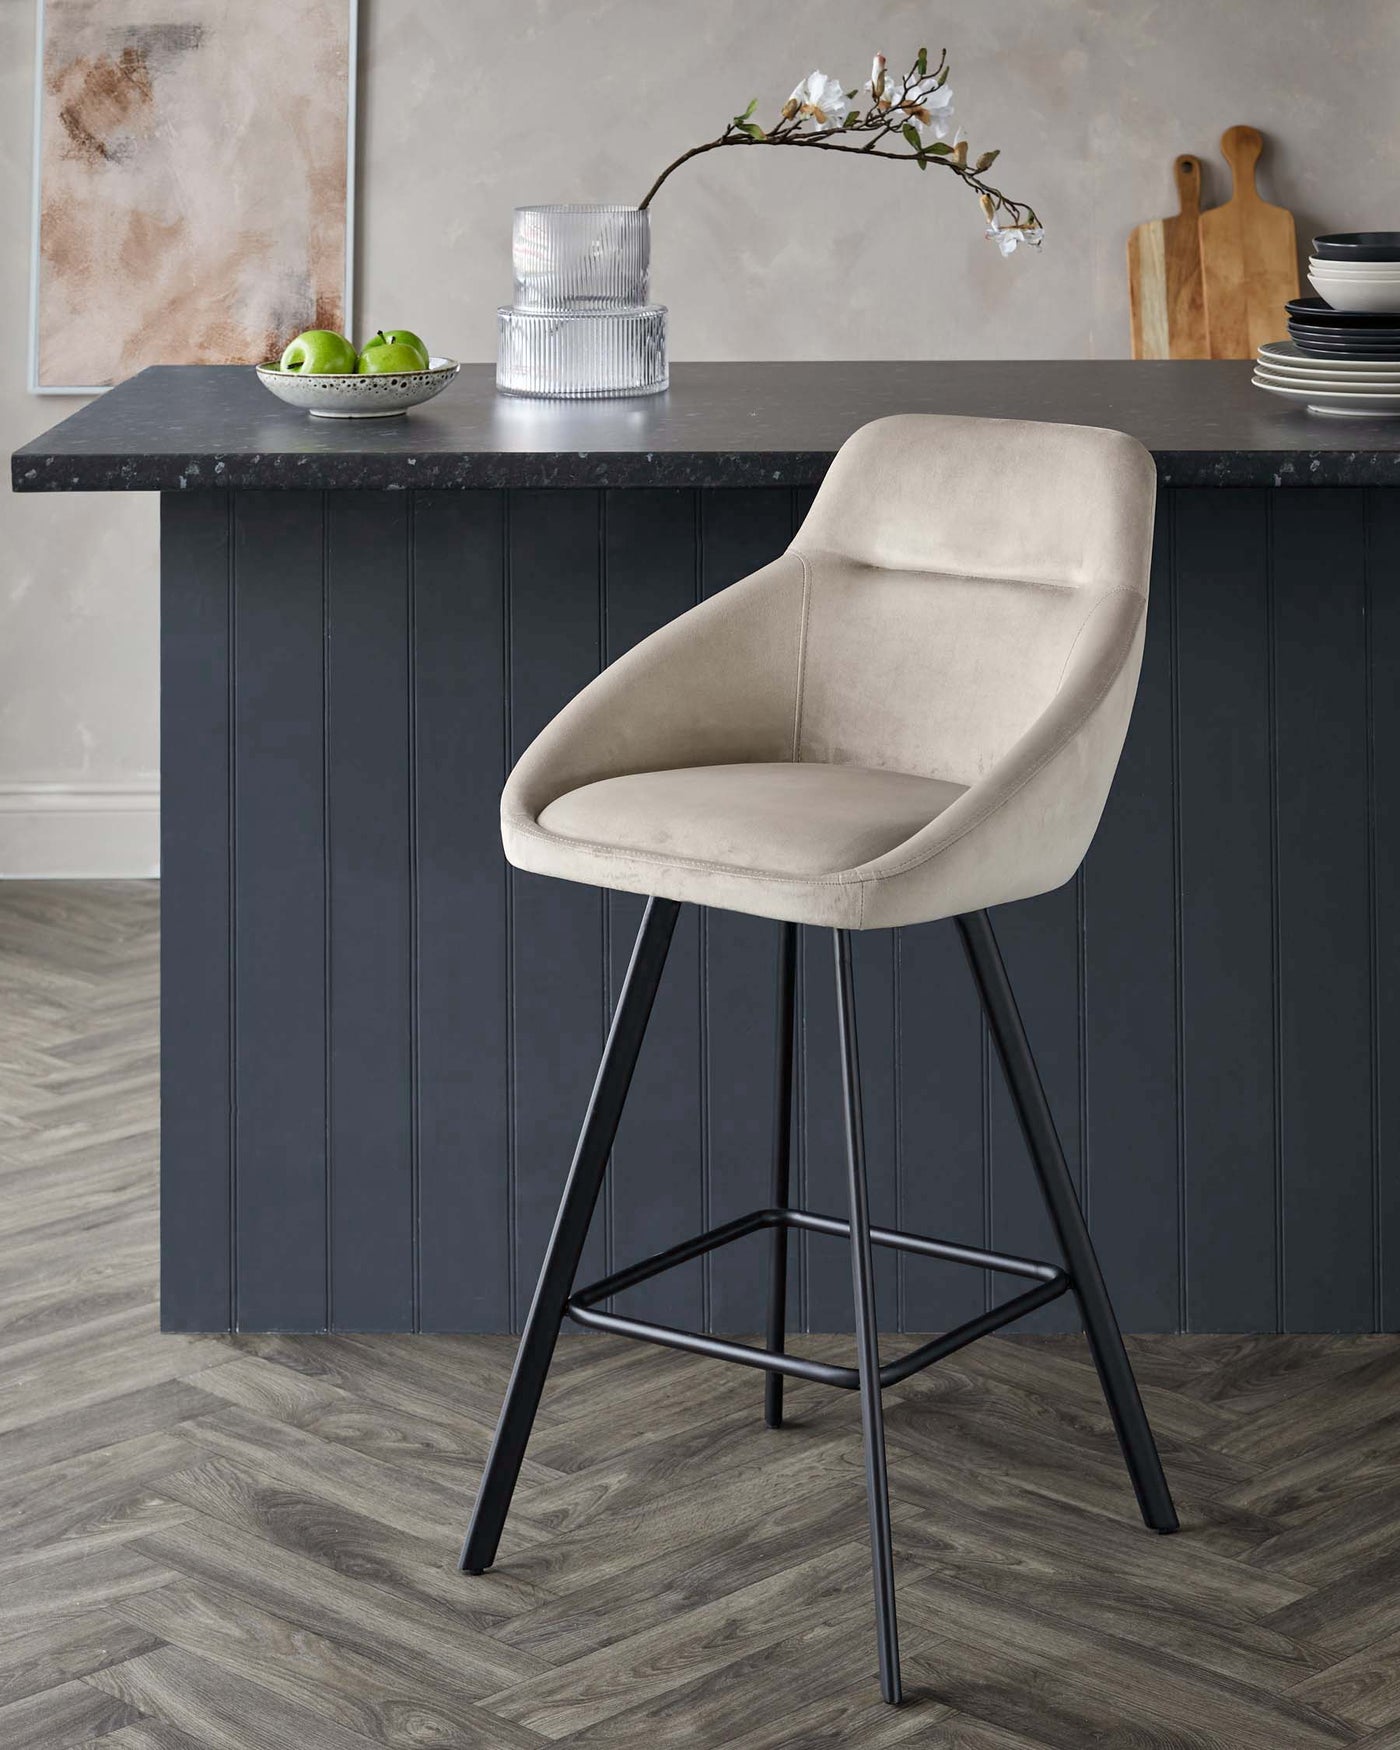 Modern bar stool with beige upholstered seat and backrest, featuring sleek black metal legs with footrest.